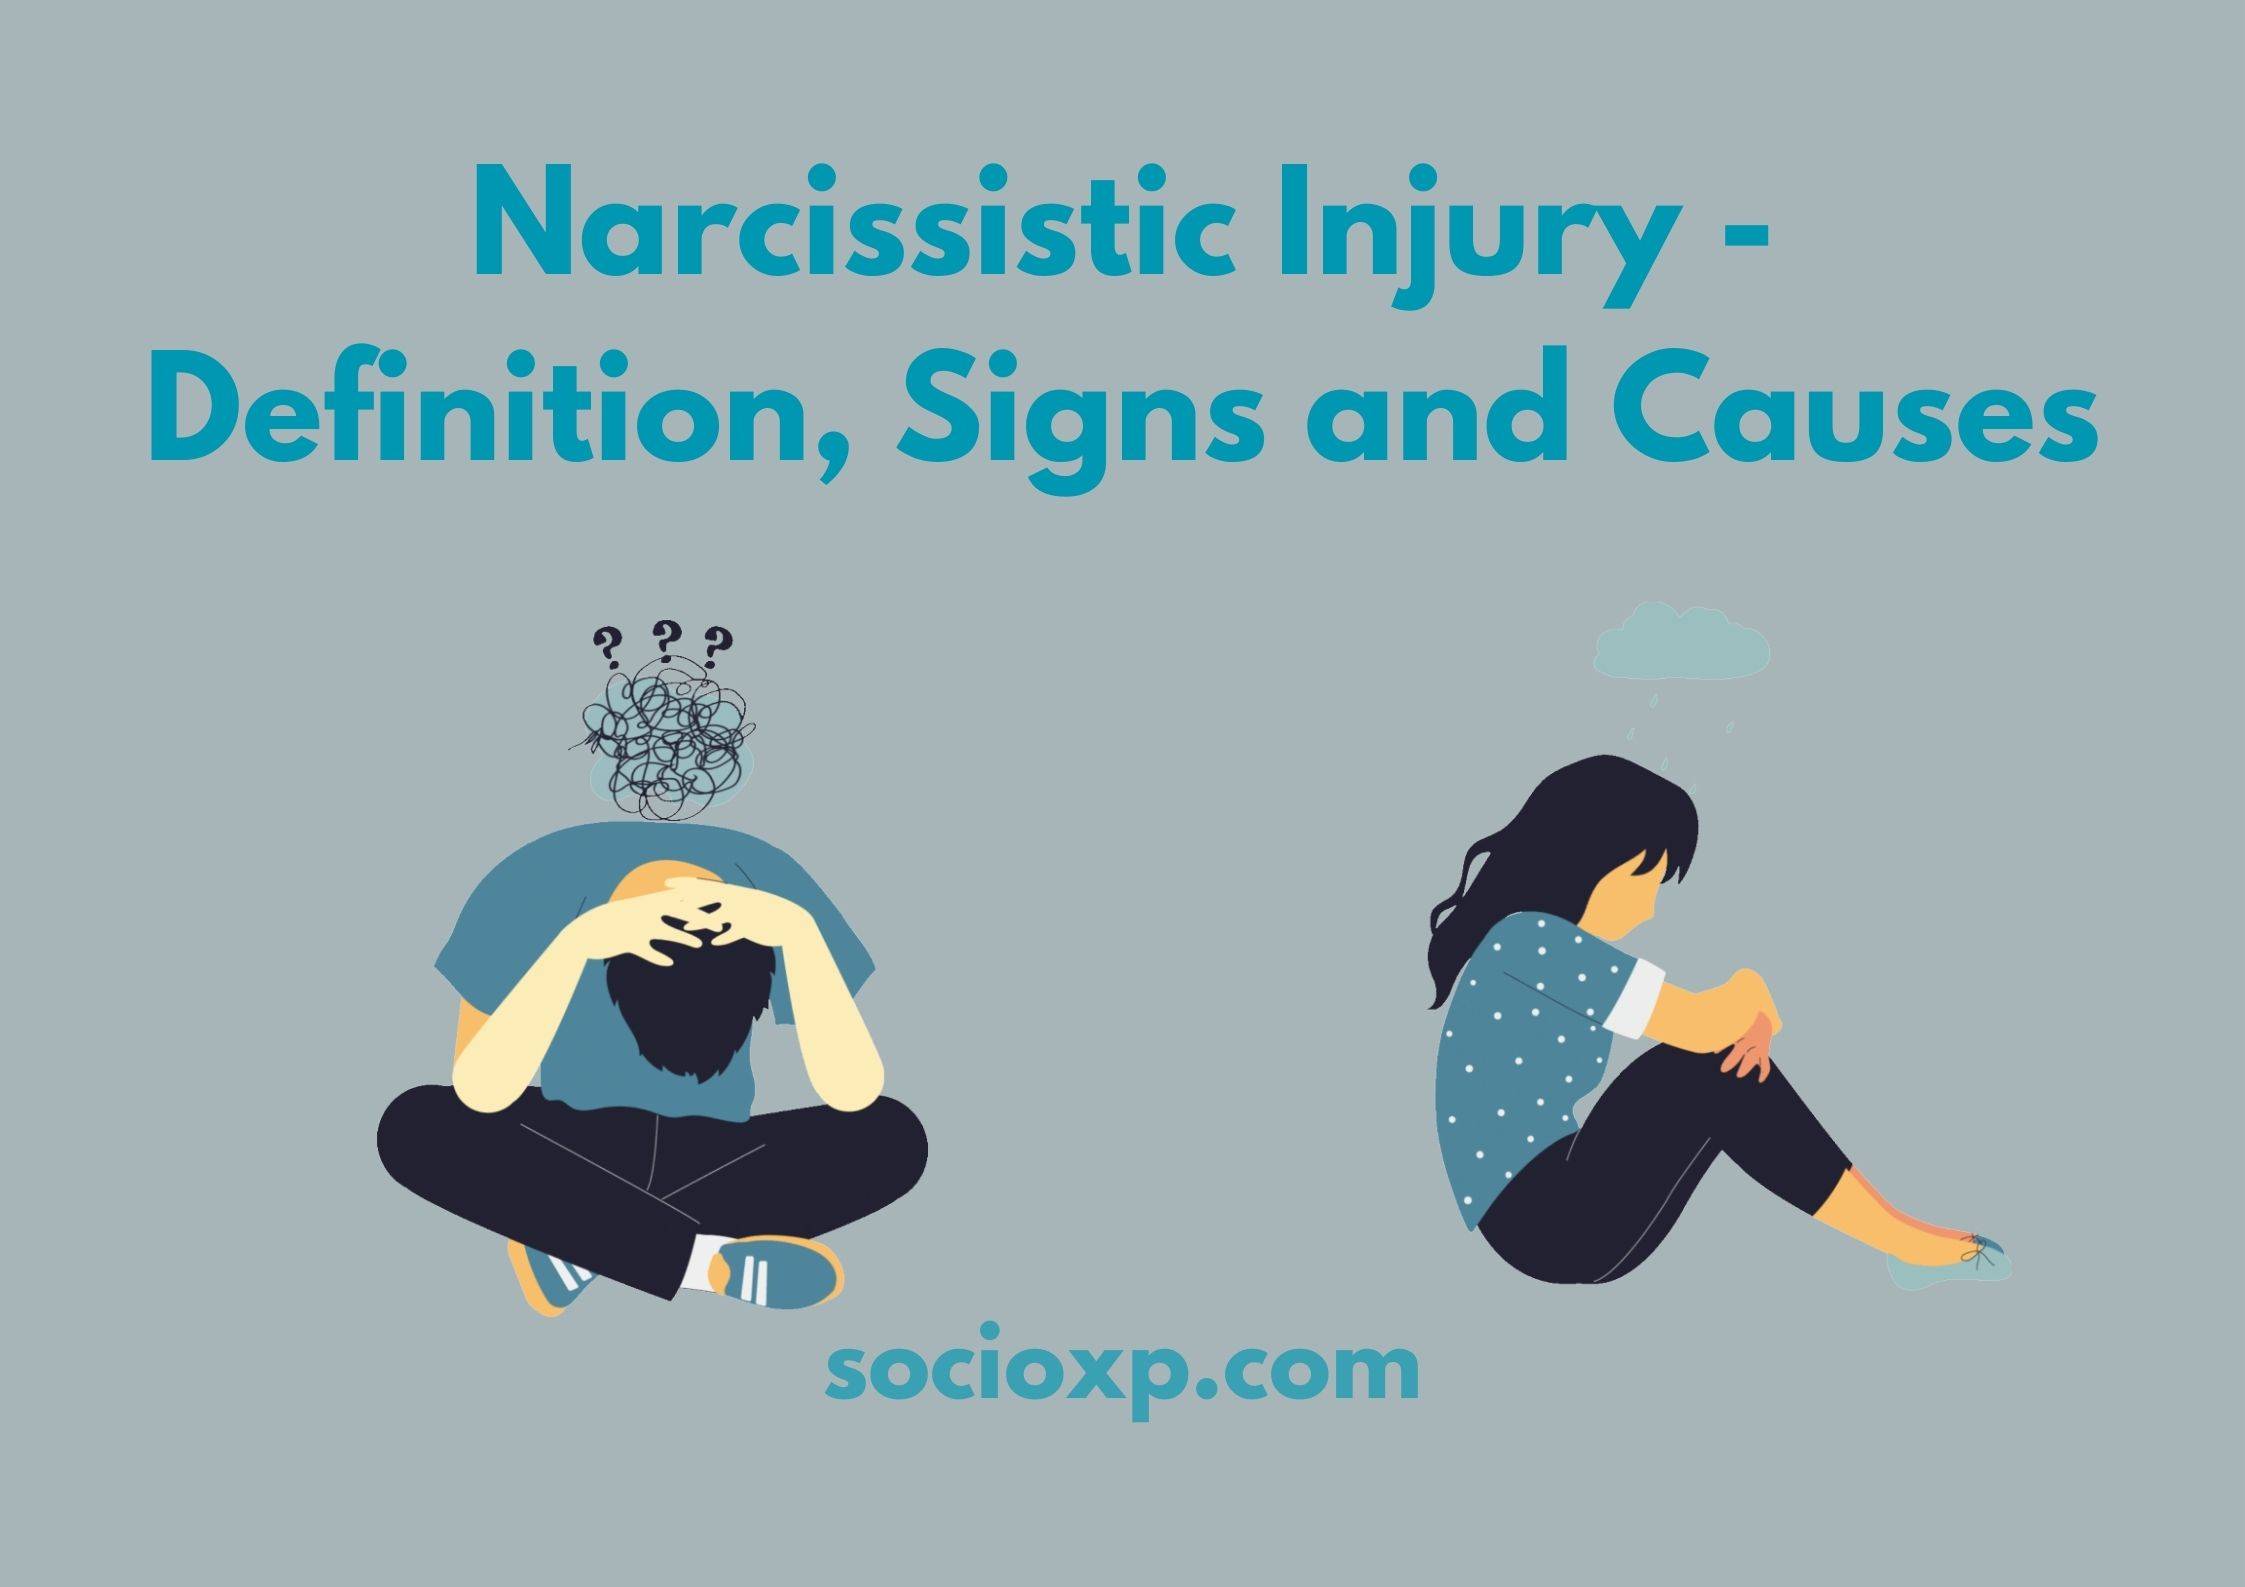 Narcissistic Injury - Definition, Signs and Causes